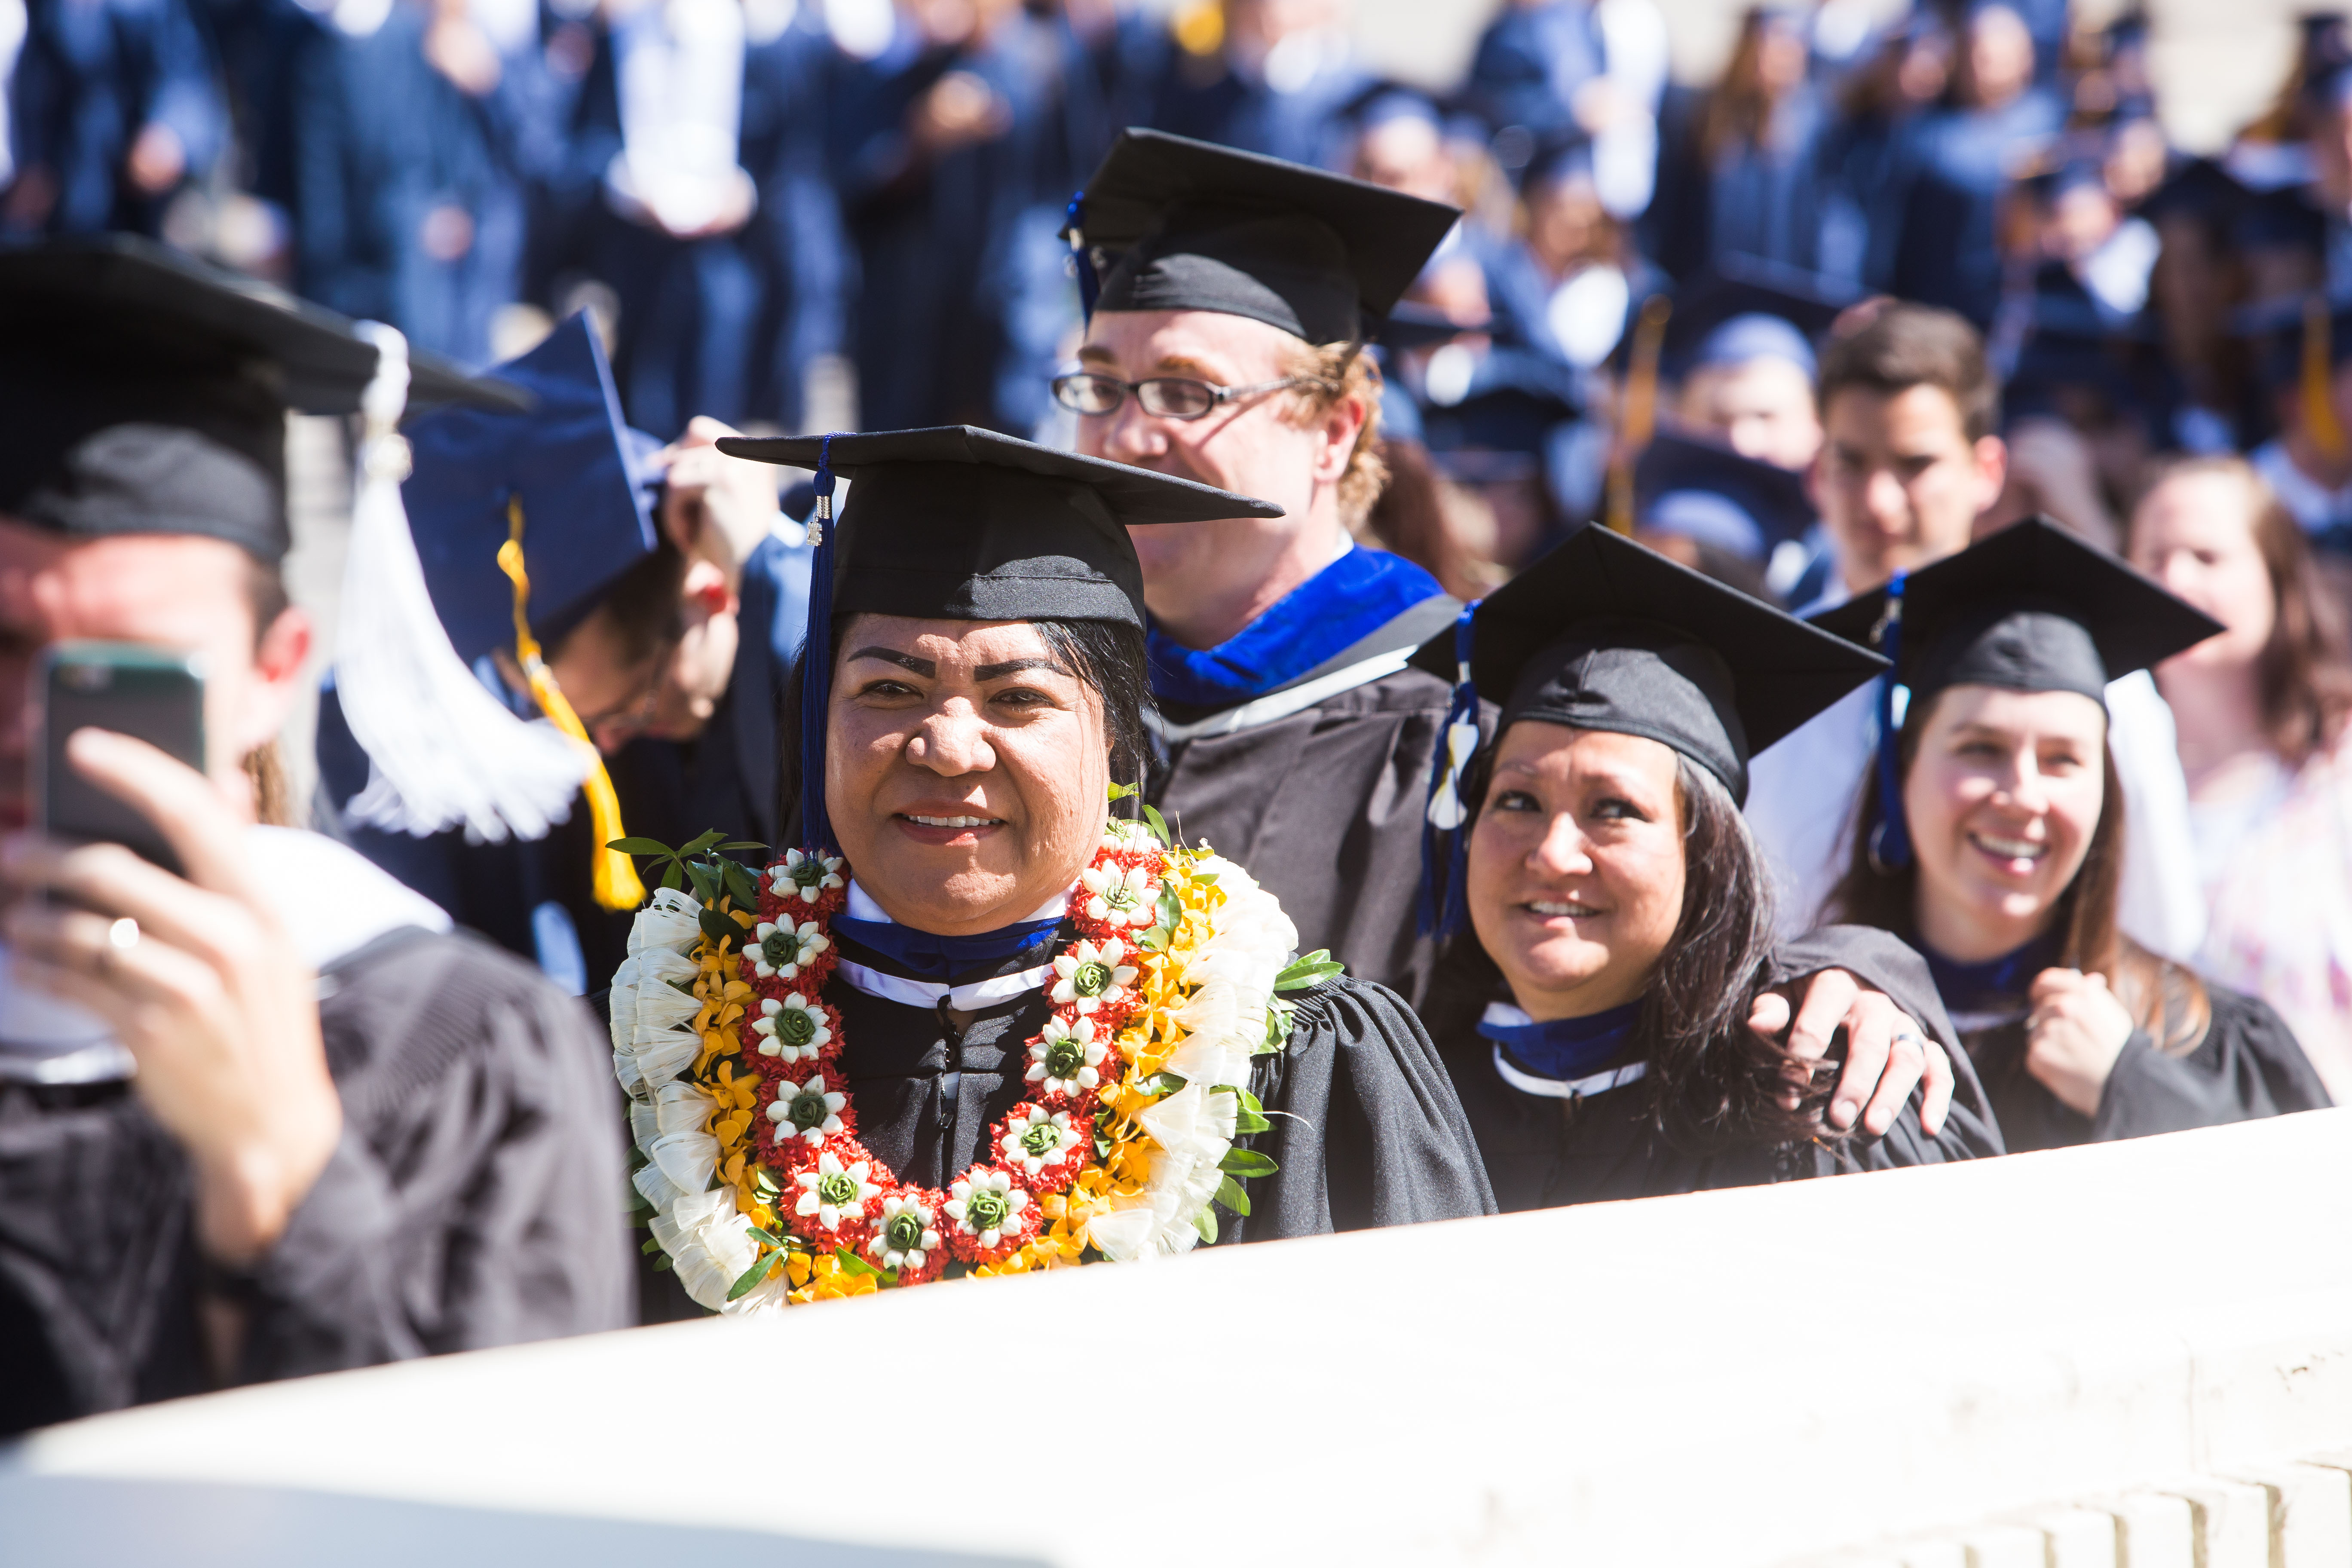 Commencement speakers encourage BYU grads to focus on beginning